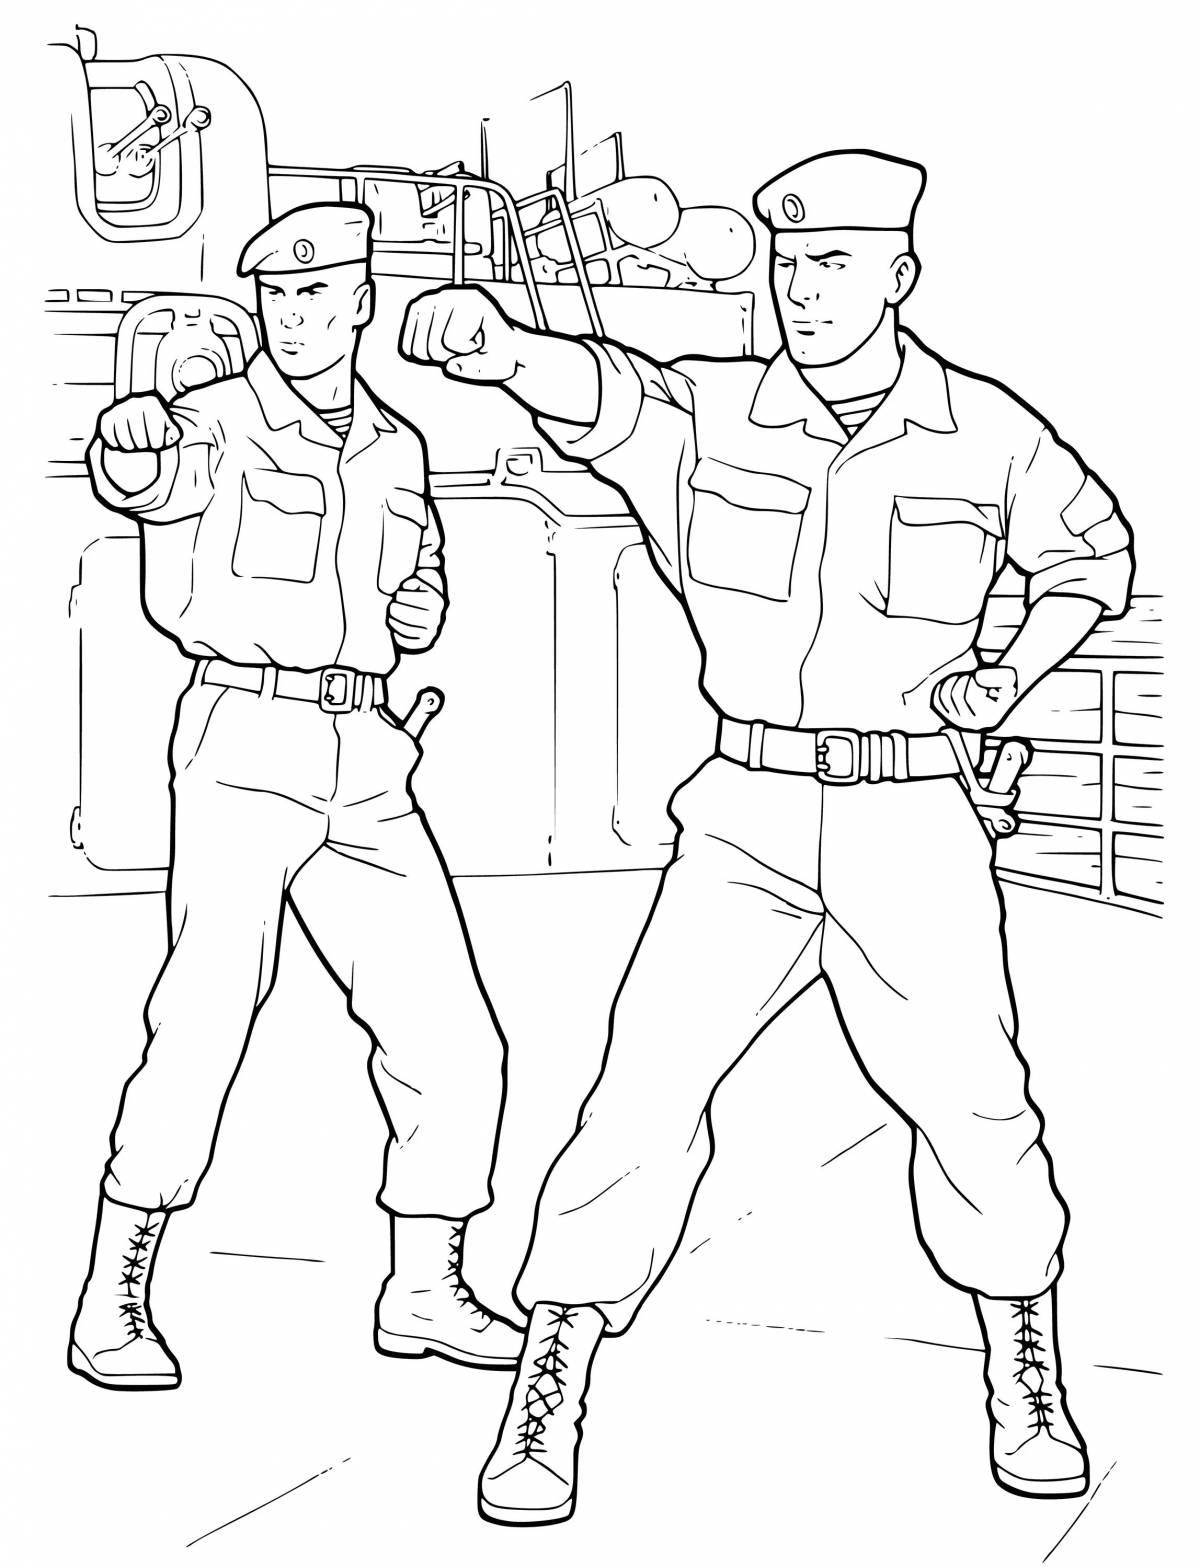 Fun army coloring book for kids 6-7 years old